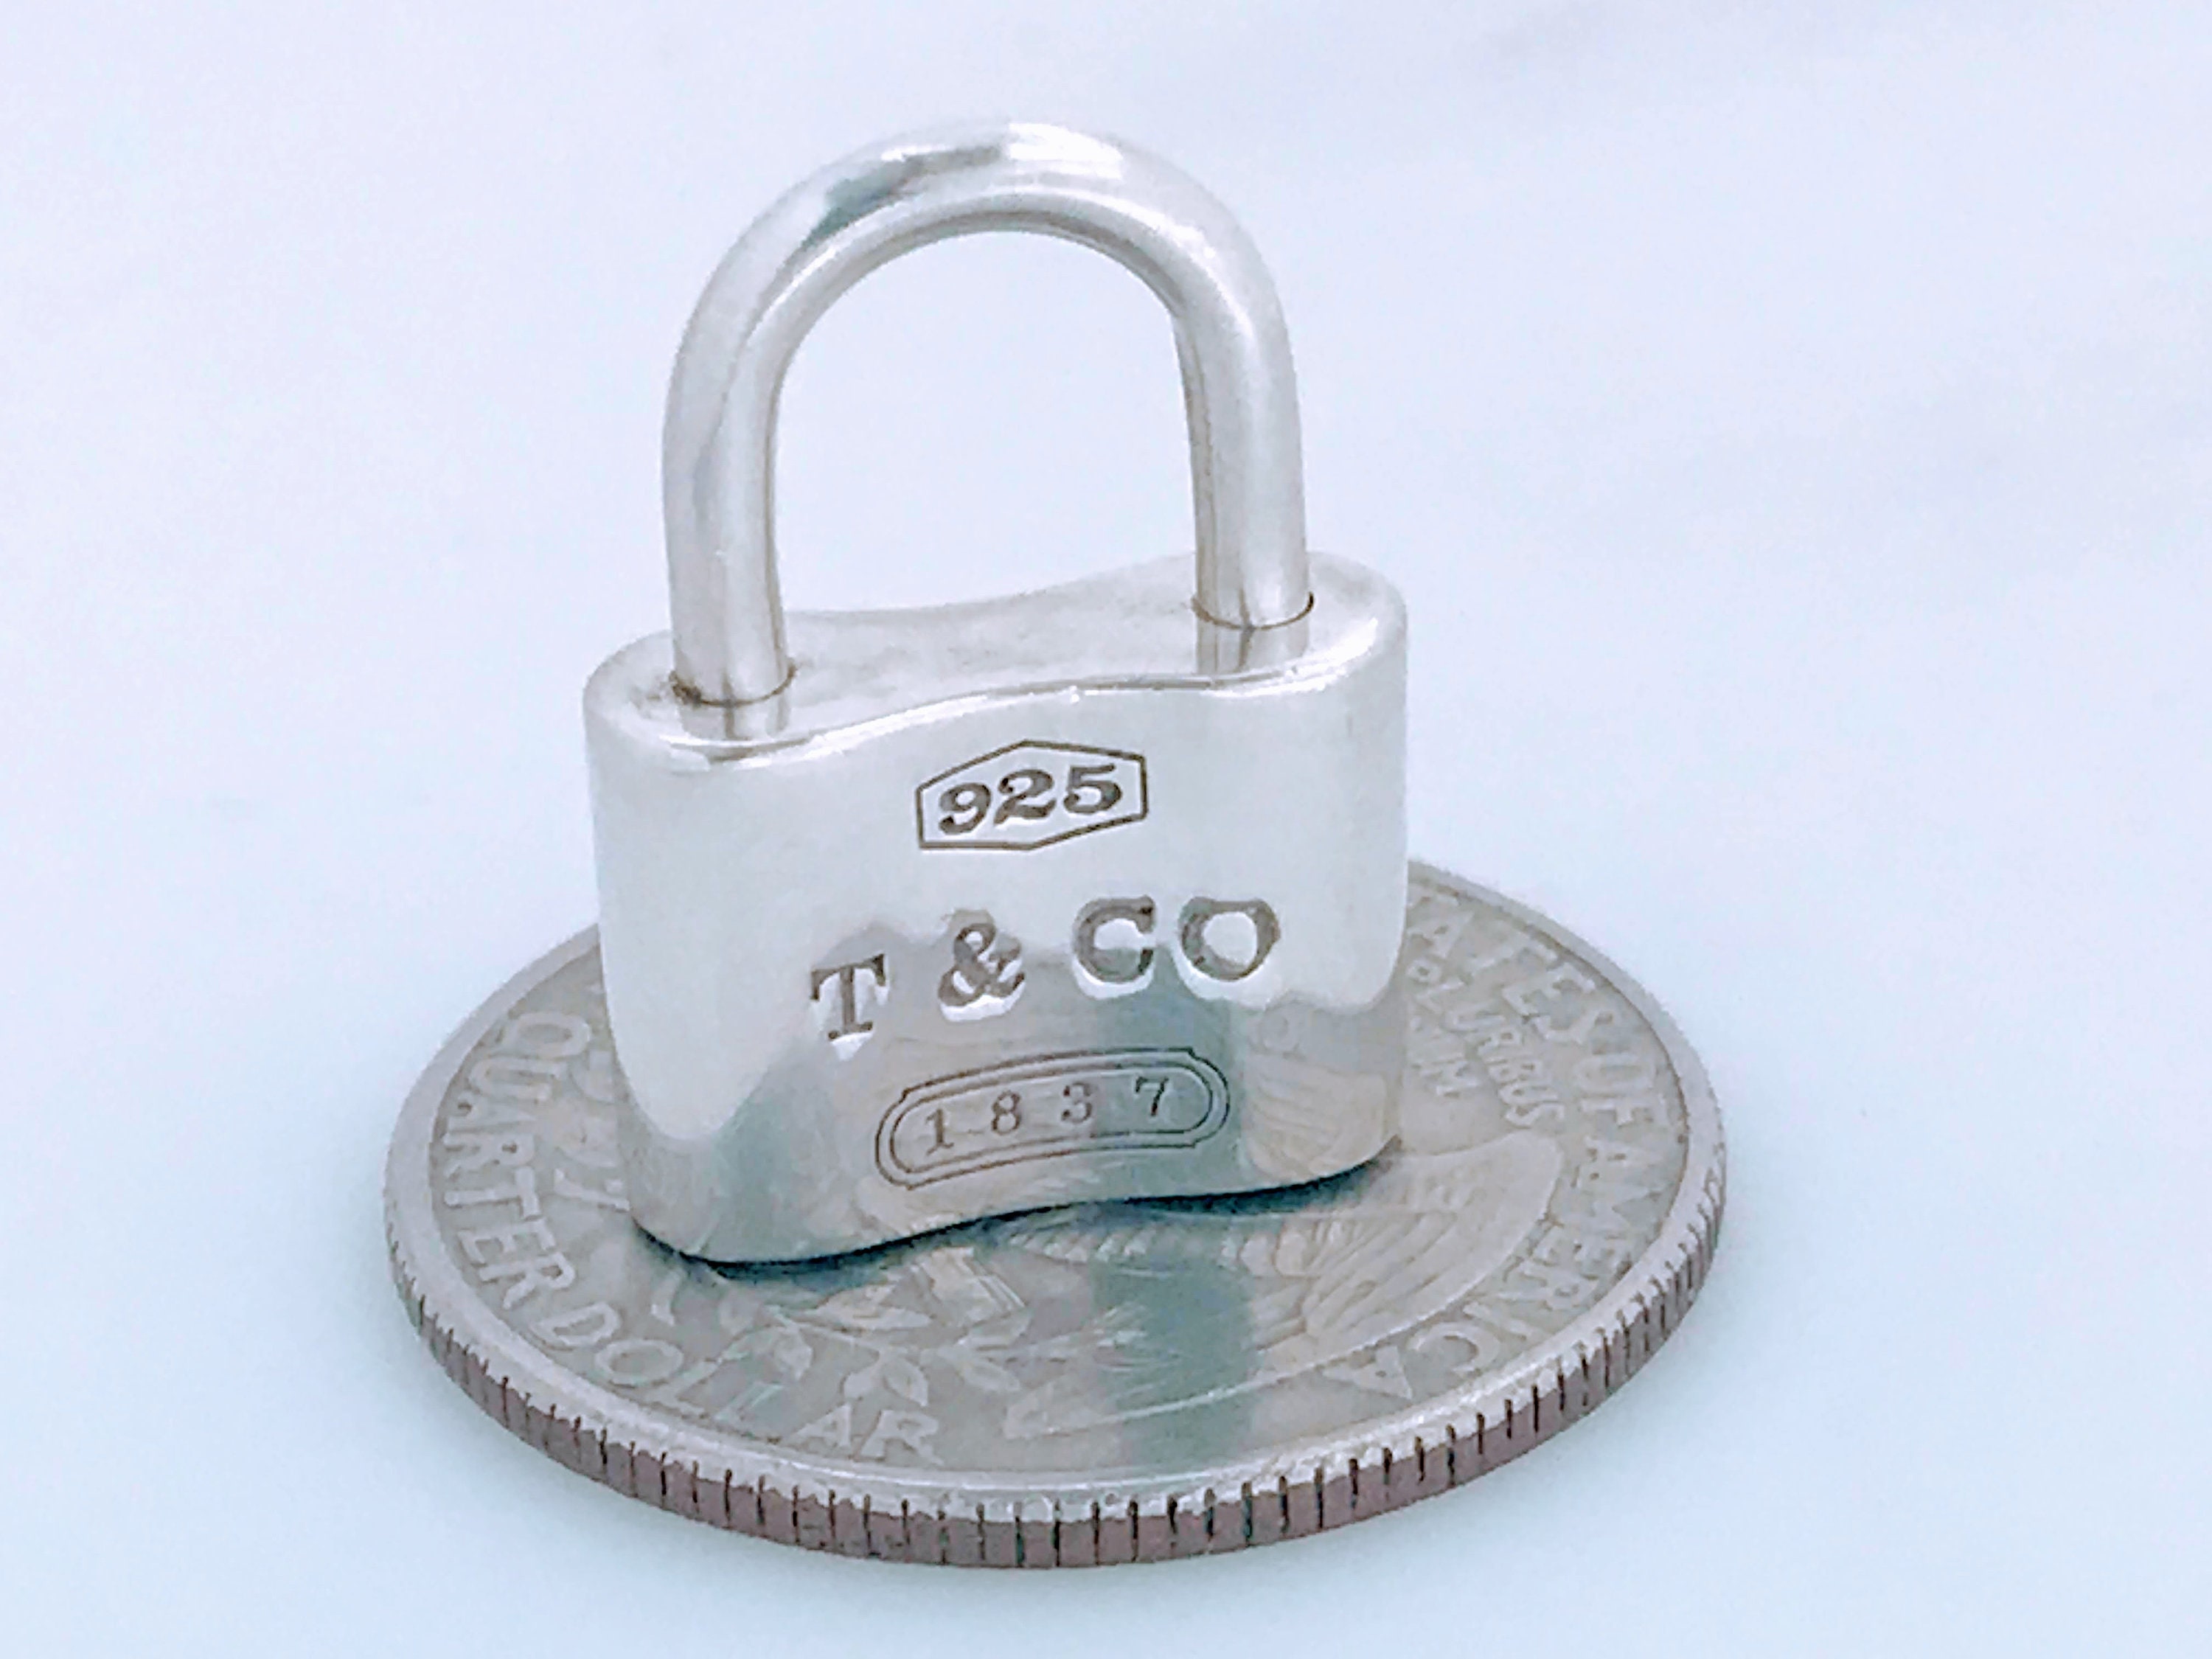 Tiffany & Co. 925 Silver 1837 Padlock Rolo Large Chain Link 16